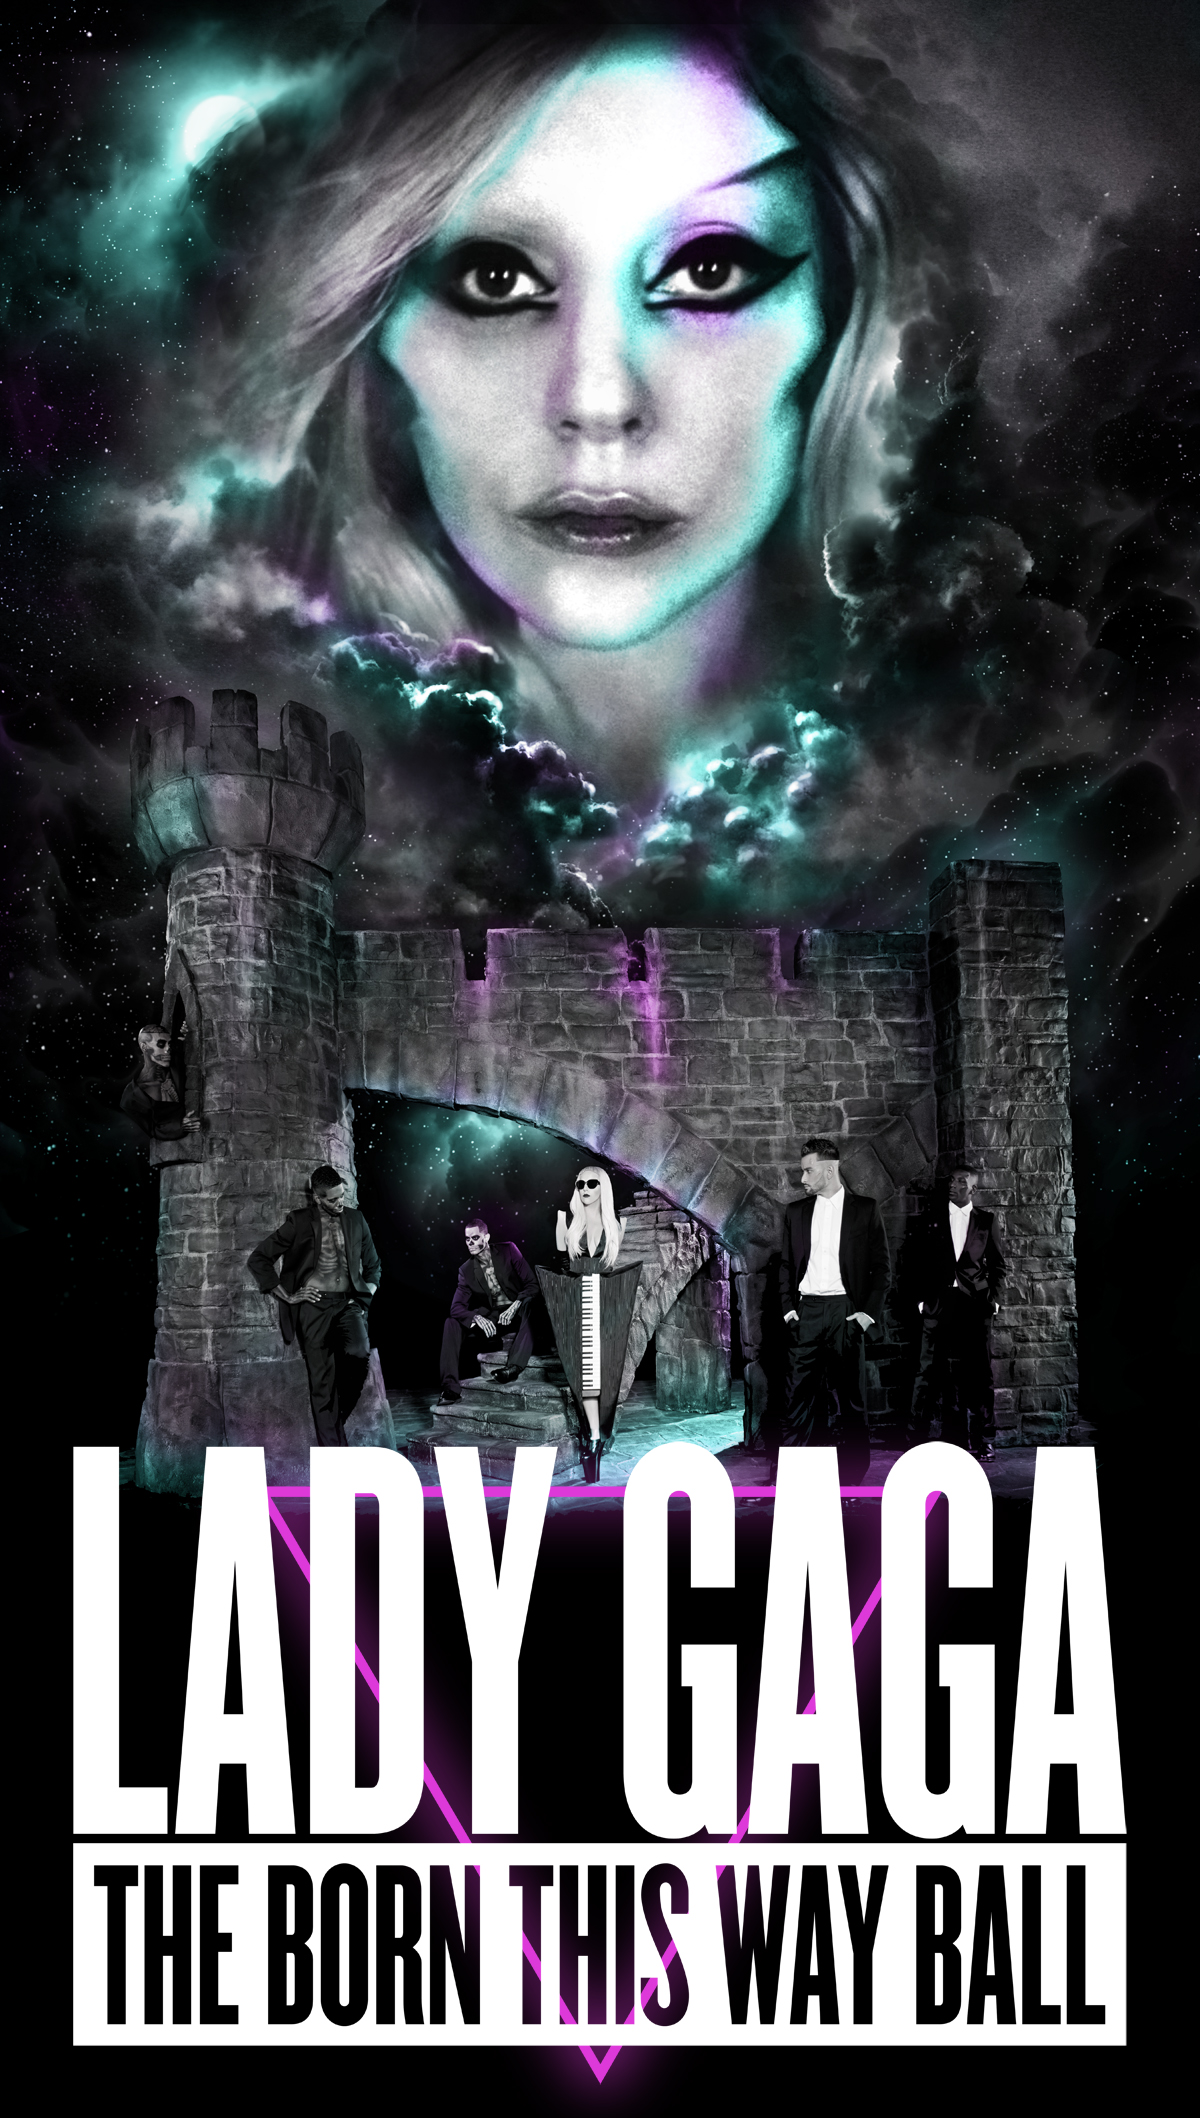 -THE-BORN-THIS-WAY-BALL-OFFICIAL-WORLD-TOUR-POSTER-2012-2013-lady-gaga-28910439-1200-2118.jpg